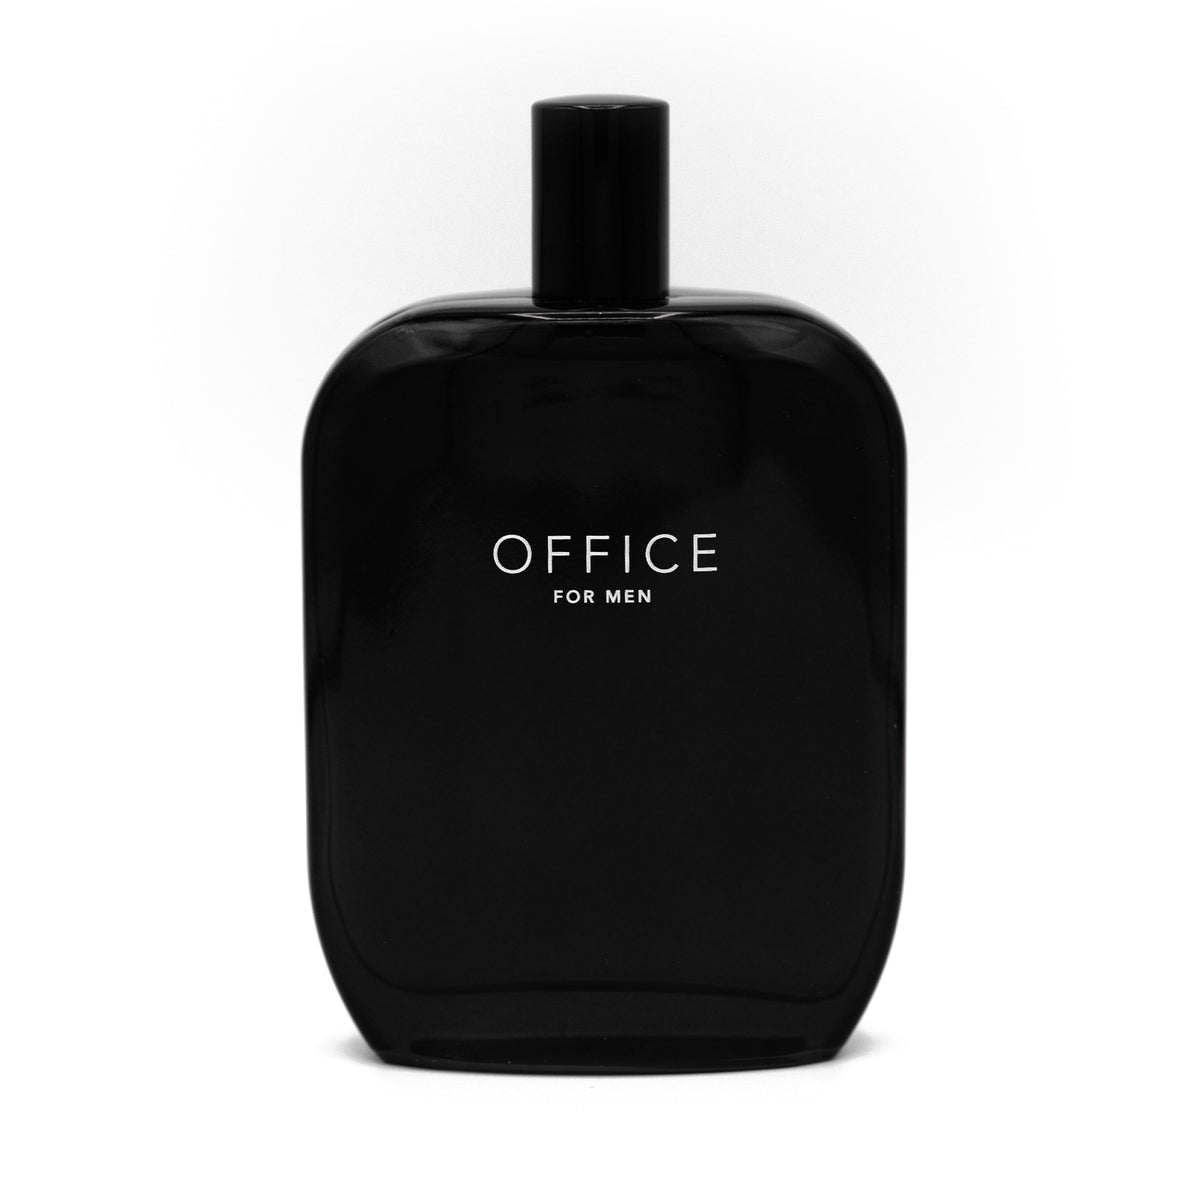 the office fragrance